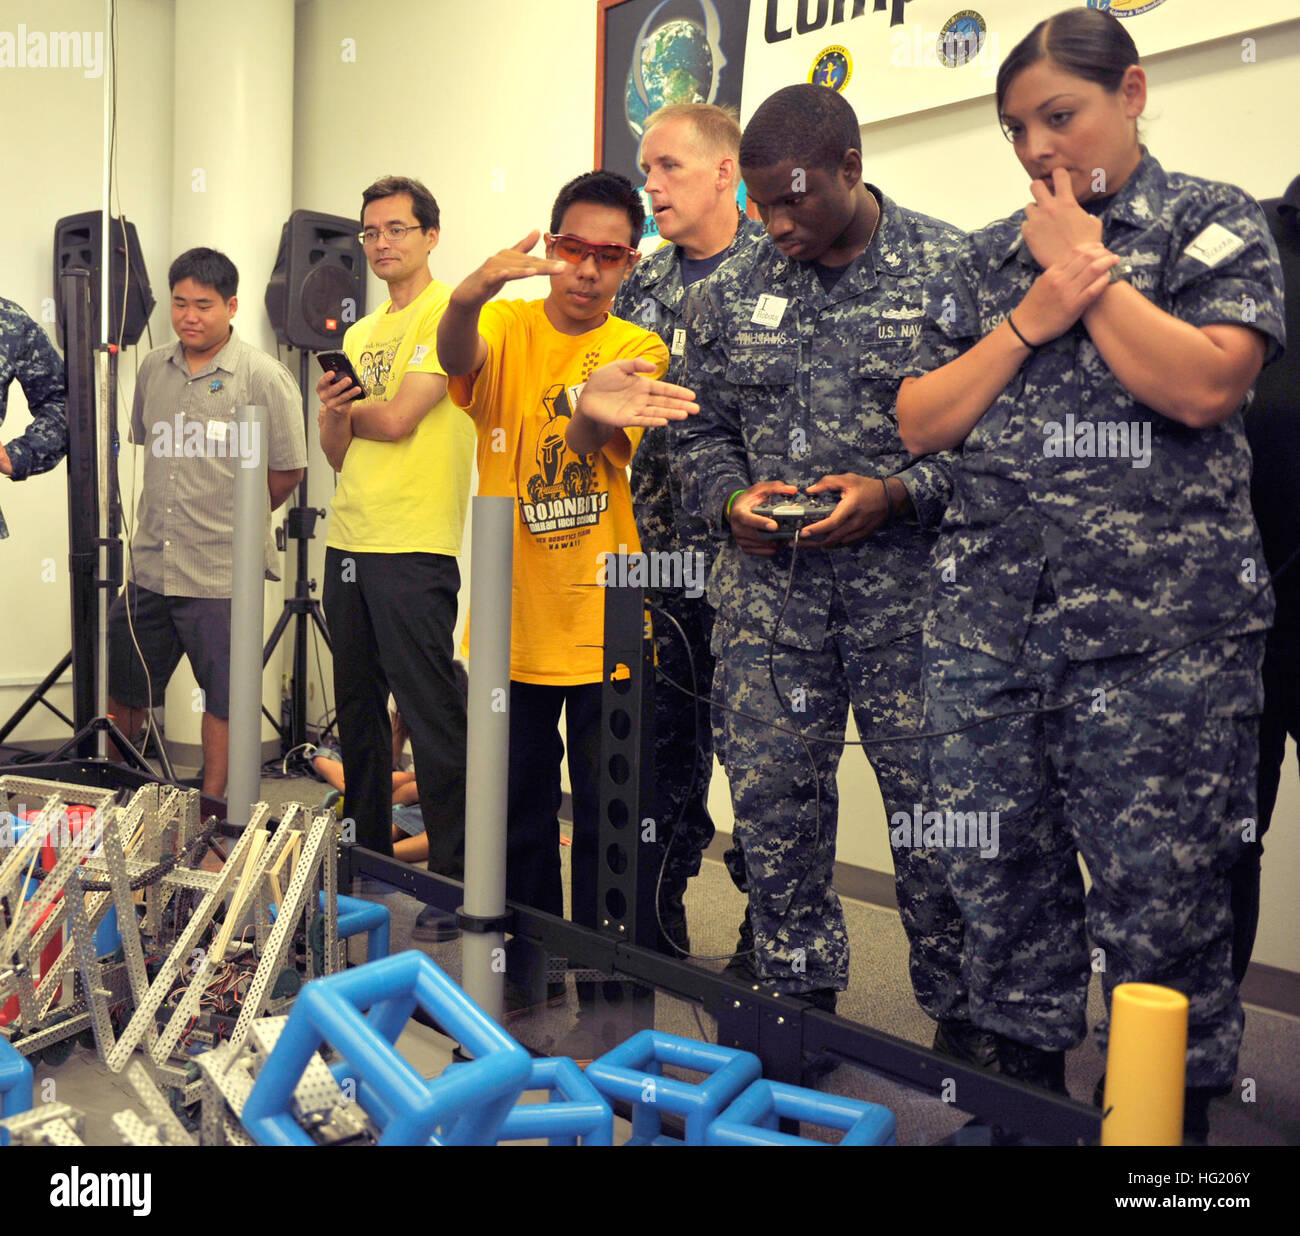 Noah Evile, a sophomore at Mililani High School, instructs Operations Specialist 2nd Class Jerome Williams and Gunner's Mate 1st Class Jennifer Dickson from USS Cape St. George (CG 71) in piloting the Mililani team's robot during a robotics competition that included Sailors piloting robots designed and built by students. The competition, sponsored by the U.S. Pacific Fleet and the Office of Naval Research, gave the students a chance to meet Rim of the Pacific (RIMPAC) Exercise 2014 participants and learn about the Navy while building proficiency in Science, Technology, Engineering, and Math (S Stock Photo